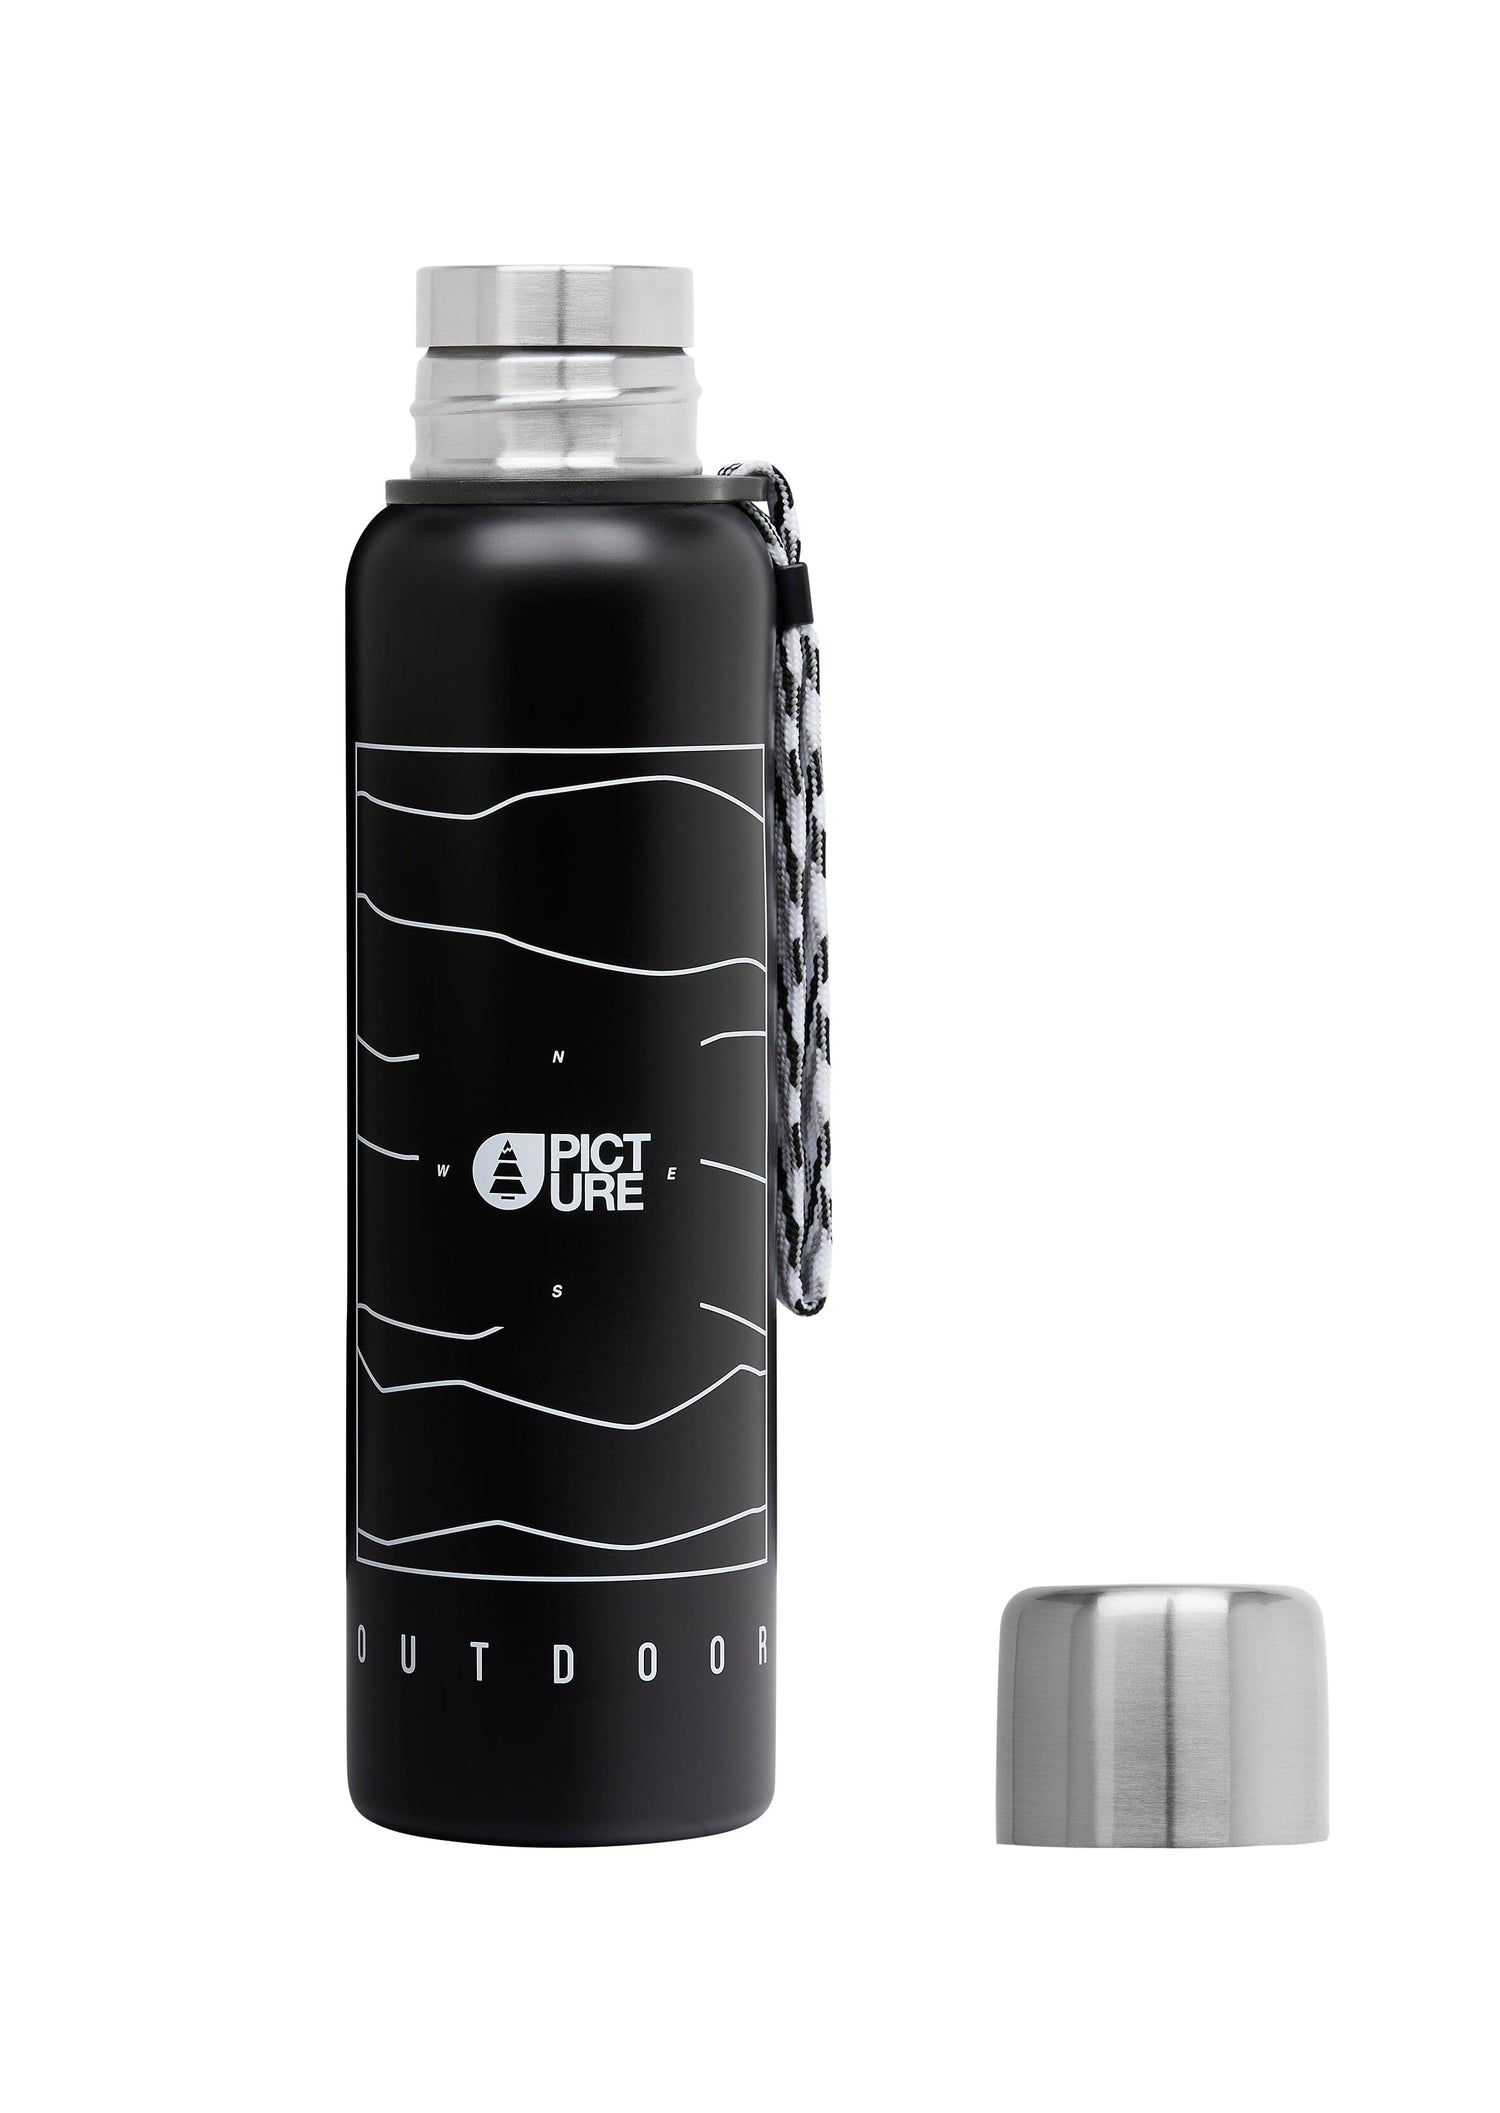 Picture Organic Campoi Vacuum Thermos Bottle - BPA free Stainless Steel Black Outdoor Cutlery